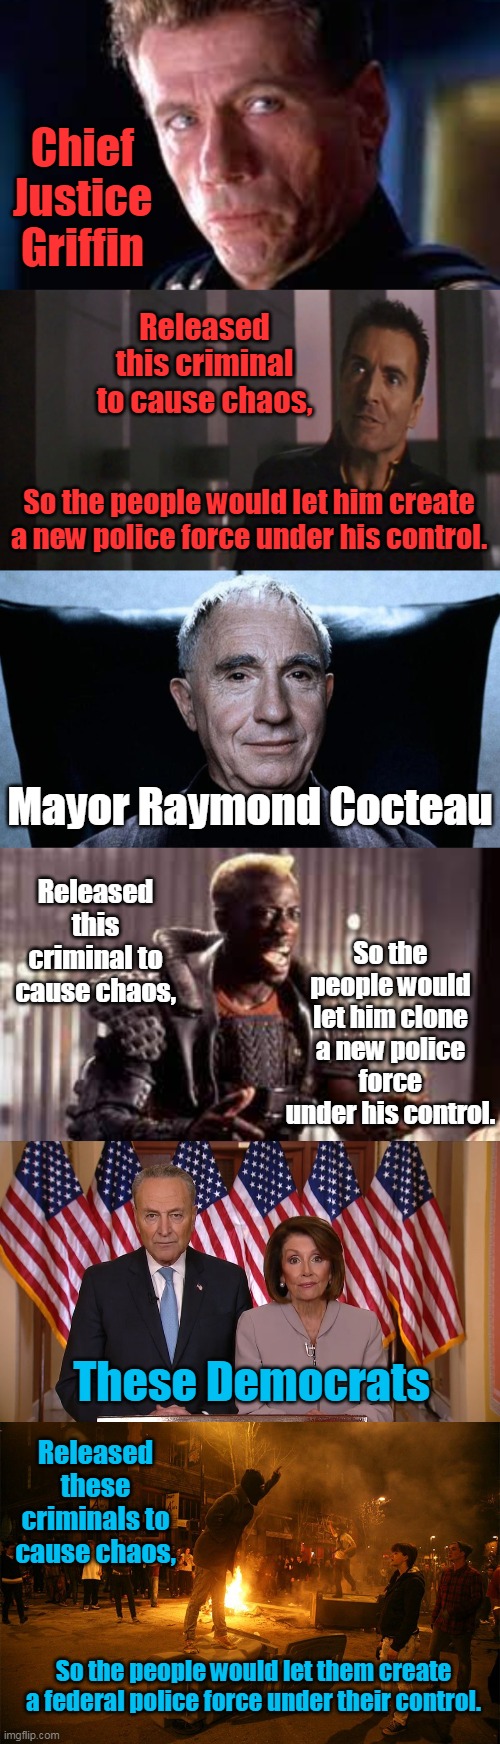 Democrats Stole Stallone's Movie Plots. | Chief Justice Griffin; Released this criminal to cause chaos, So the people would let him create a new police force under his control. Mayor Raymond Cocteau; Released this criminal to cause chaos, So the people would let him clone a new police force under his control. These Democrats; Released these criminals to cause chaos, So the people would let them create a federal police force under their control. | image tagged in chuck and nancy,berkeley riots,demolition man,judge dredd,rico,phoenix | made w/ Imgflip meme maker